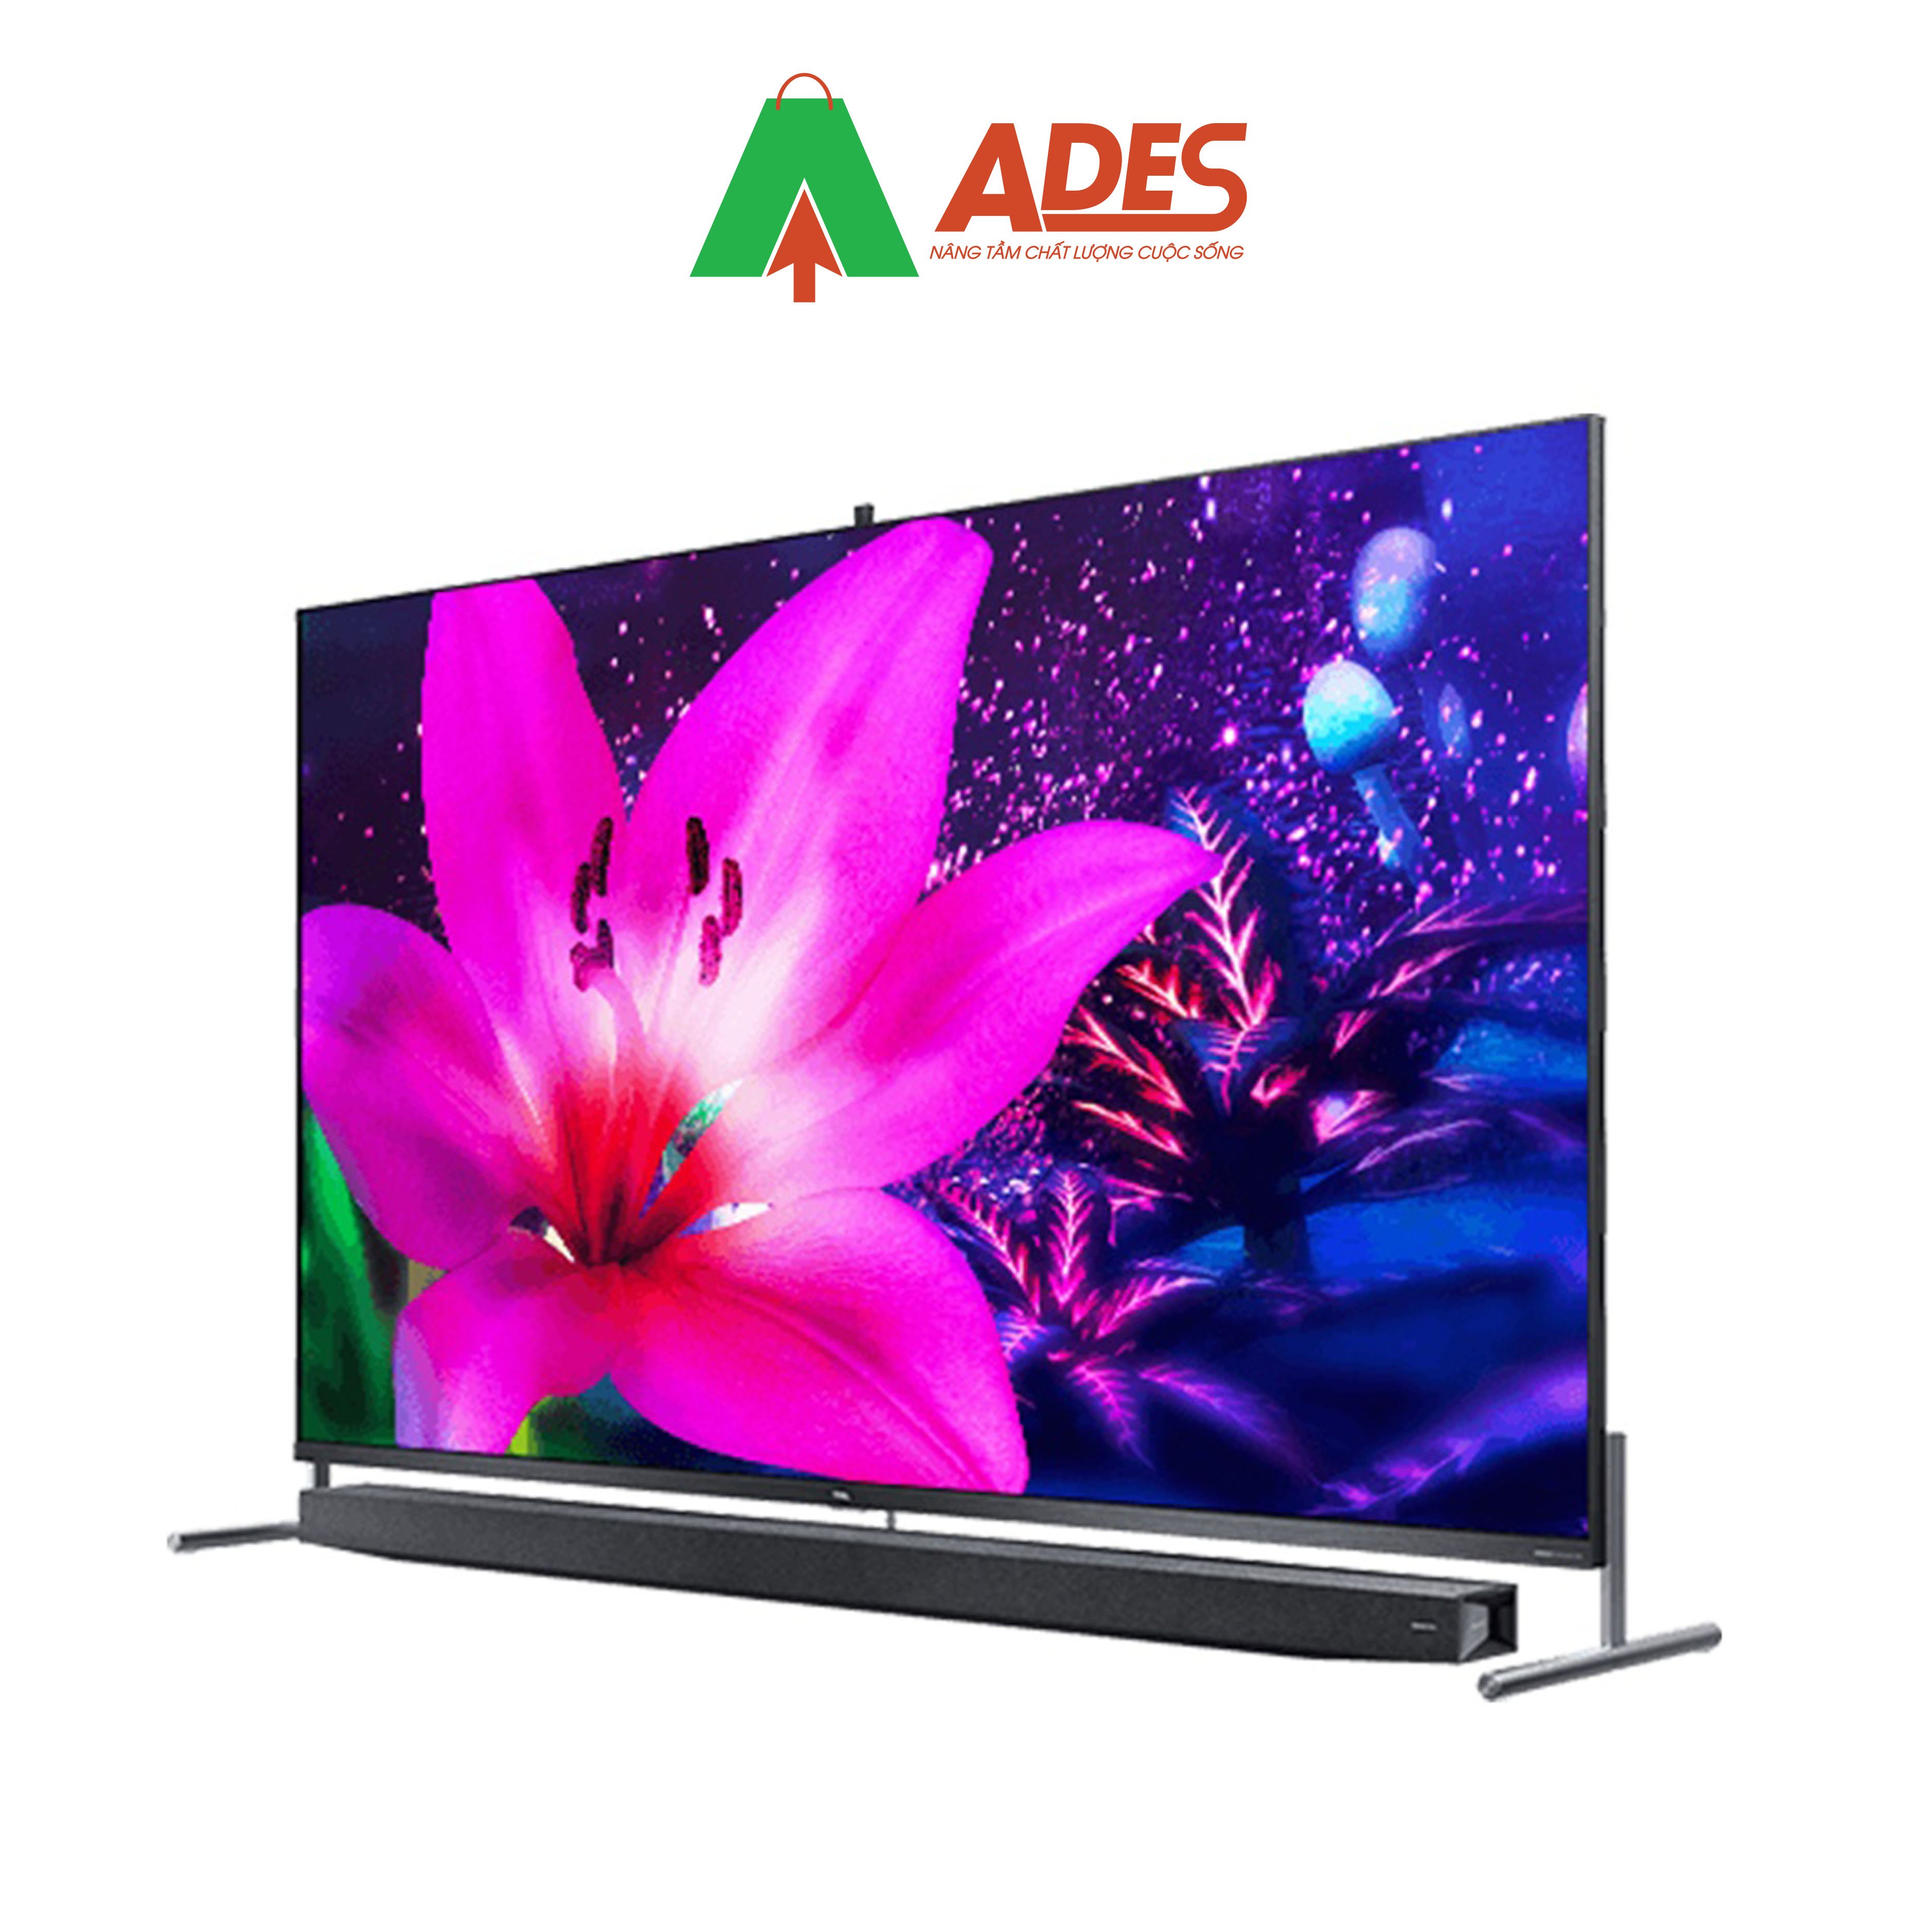 Hinh anh thuc te Android TV TCL QLED 8K 75 Inch 75X915